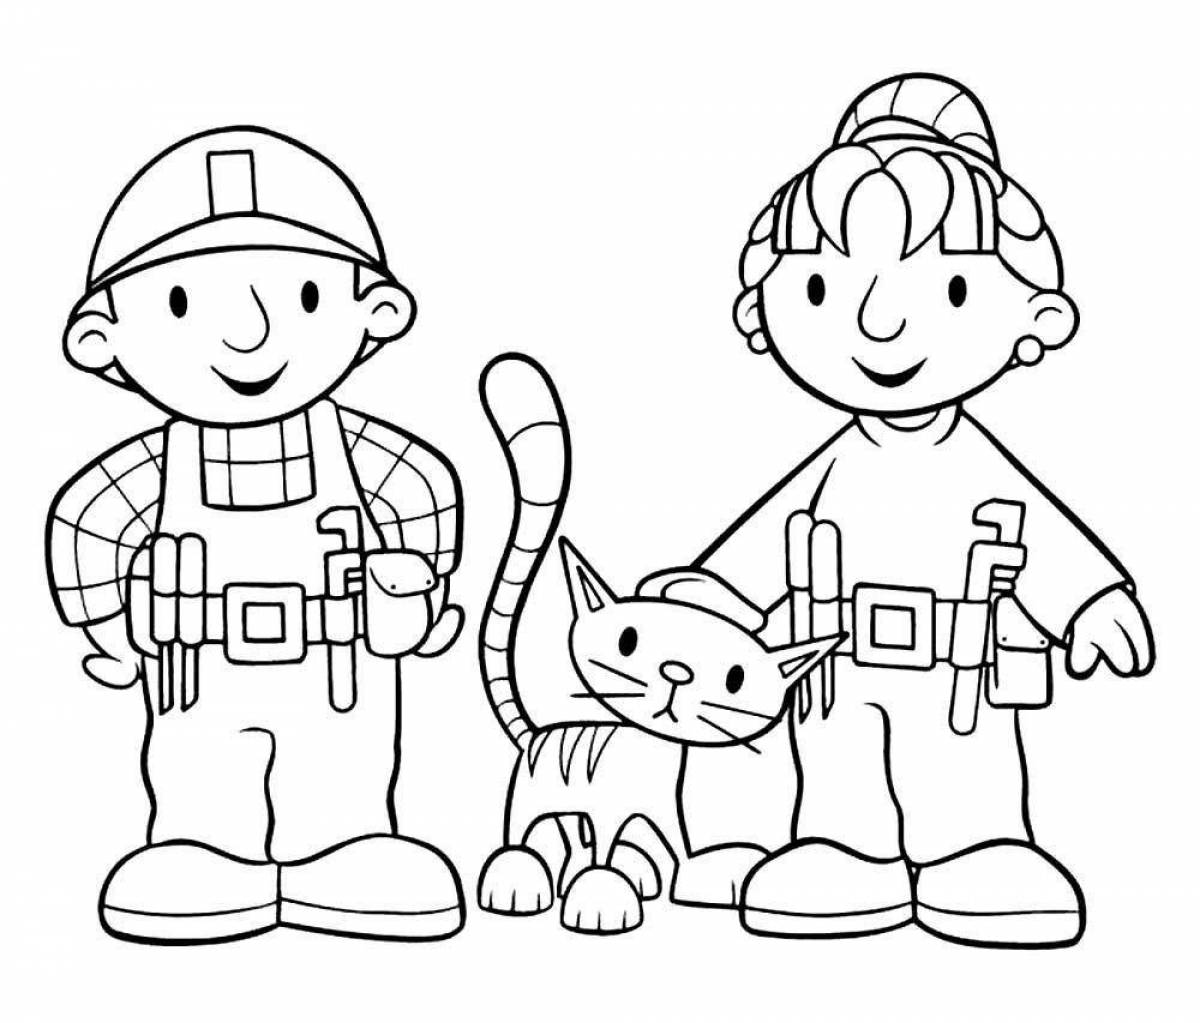 Occupational safety for children #16